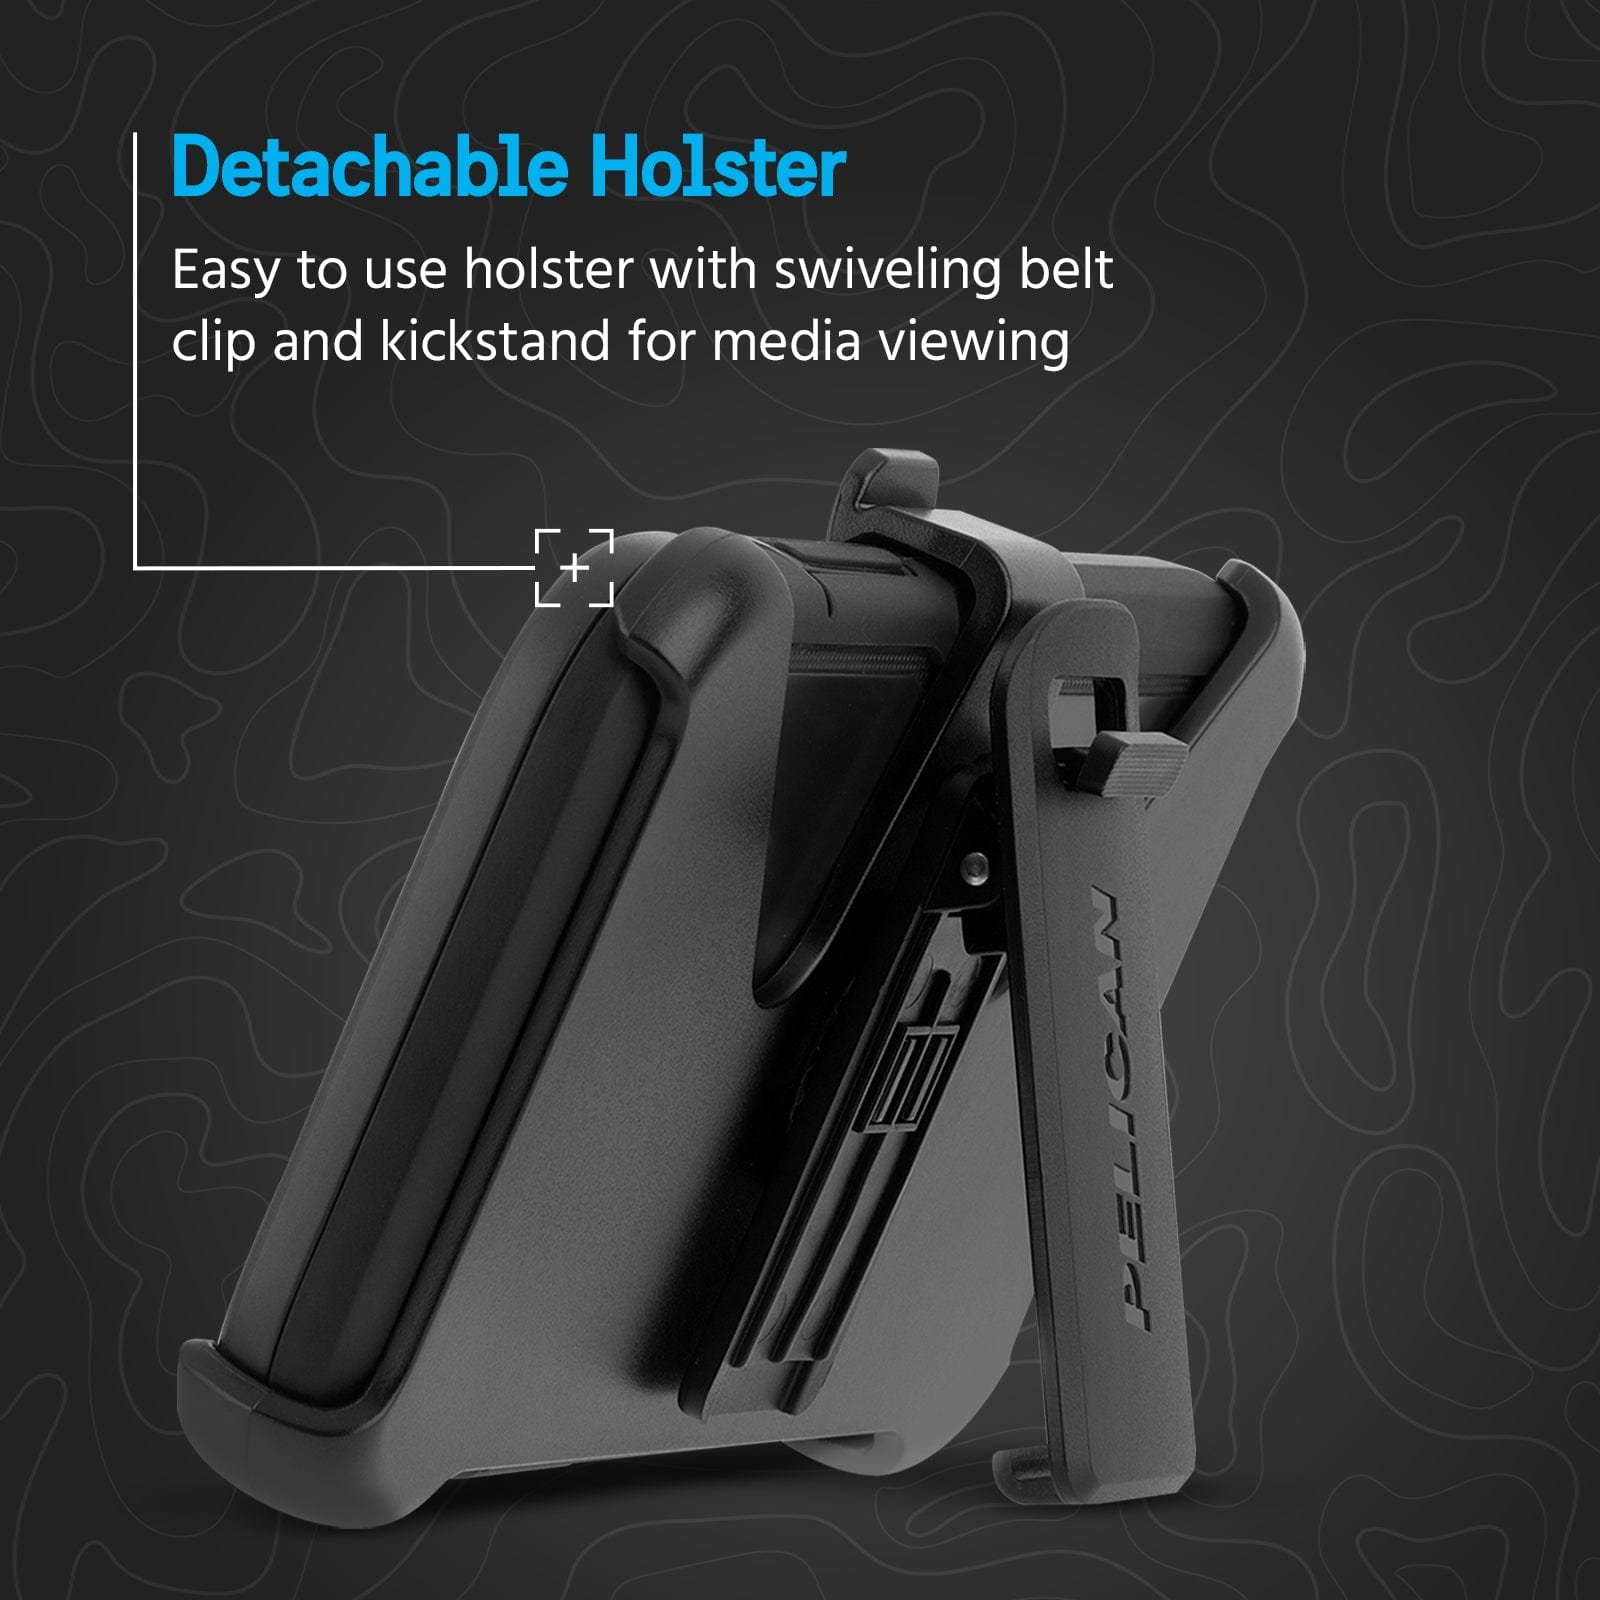 DETACHABLE HOLSTER. EASY TO USE WITH SWIVELING BELT CLIP AND KICKSTAND FOR MEDIA VIEWING